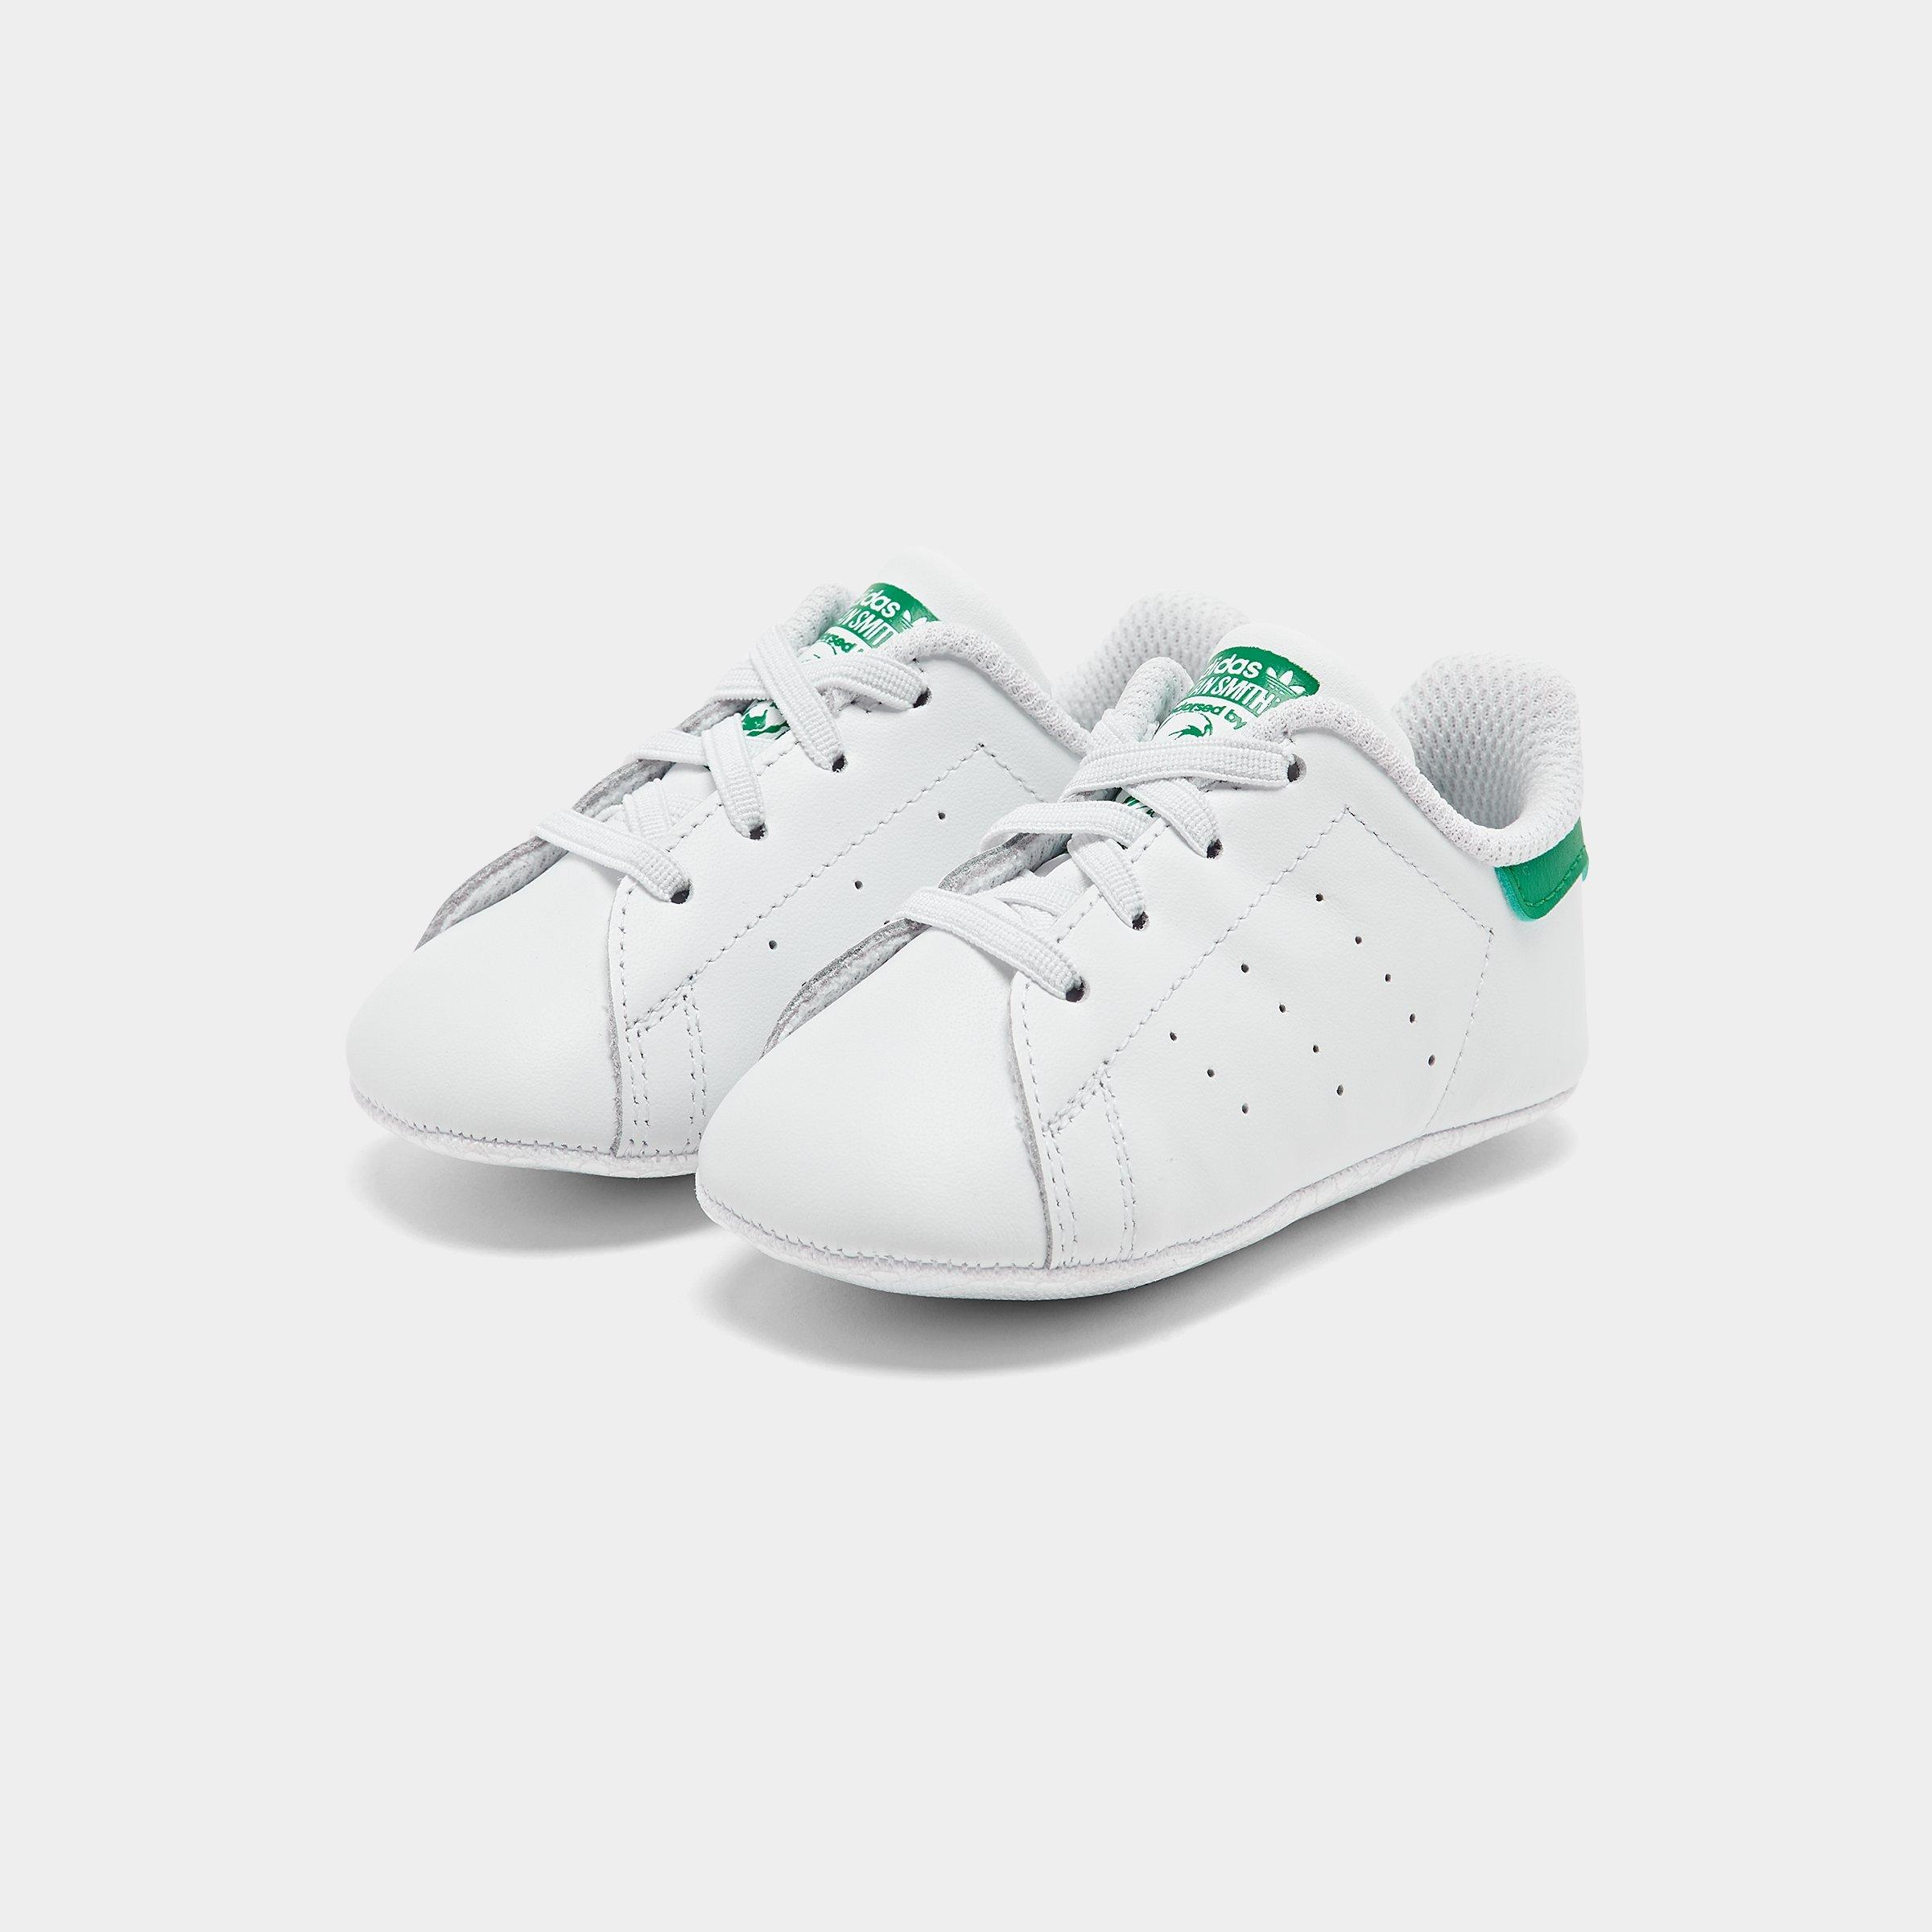 adidas stan smith baby shoes